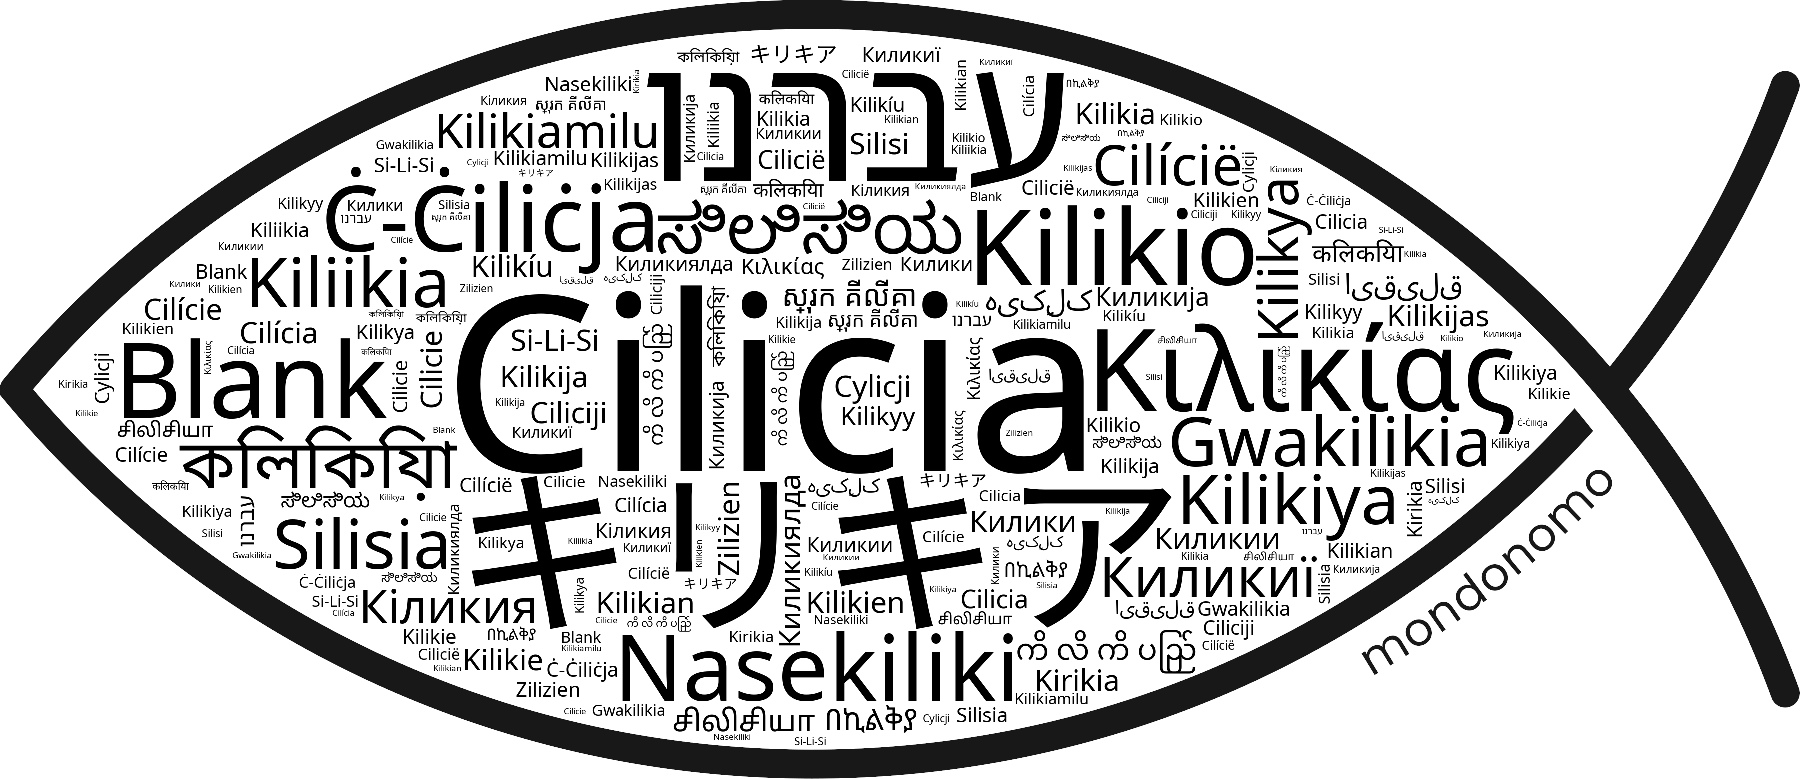 Name Cilicia in the world's Bibles